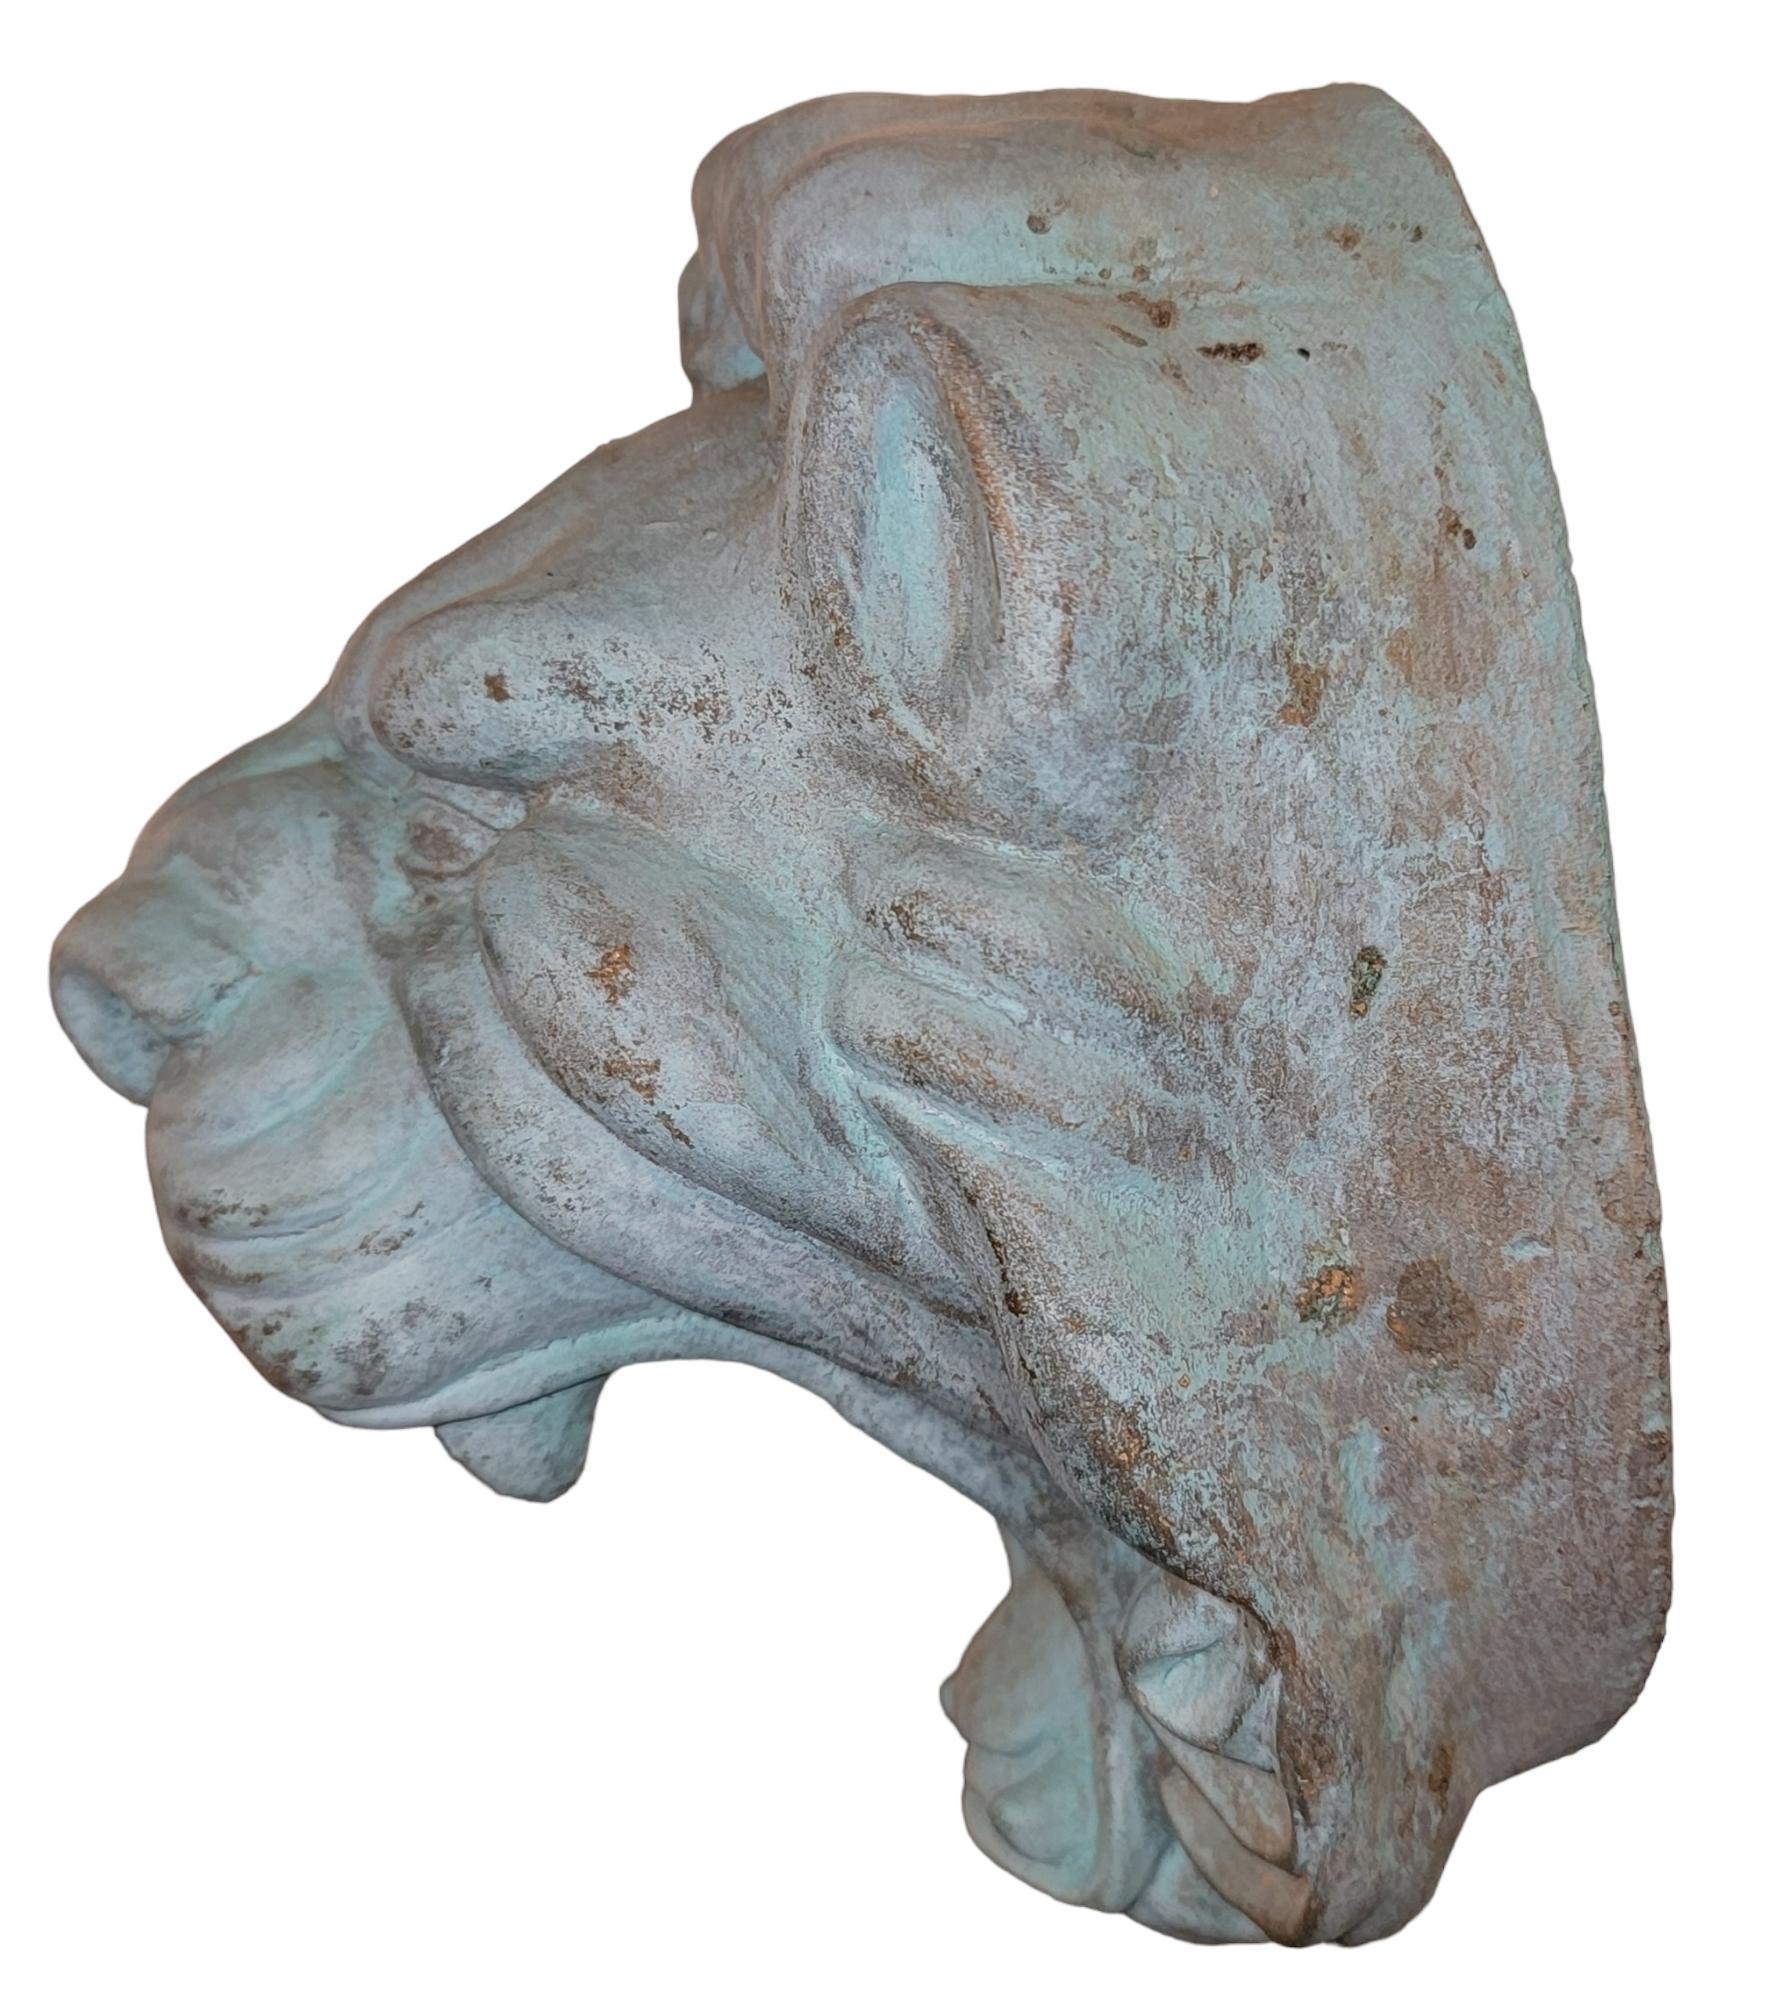 Lion Cement Garden Ornament. Has a wire in the back for hanging may also be used as a placed garden piece. wonderful color and great age.
Please see our other ornaments.